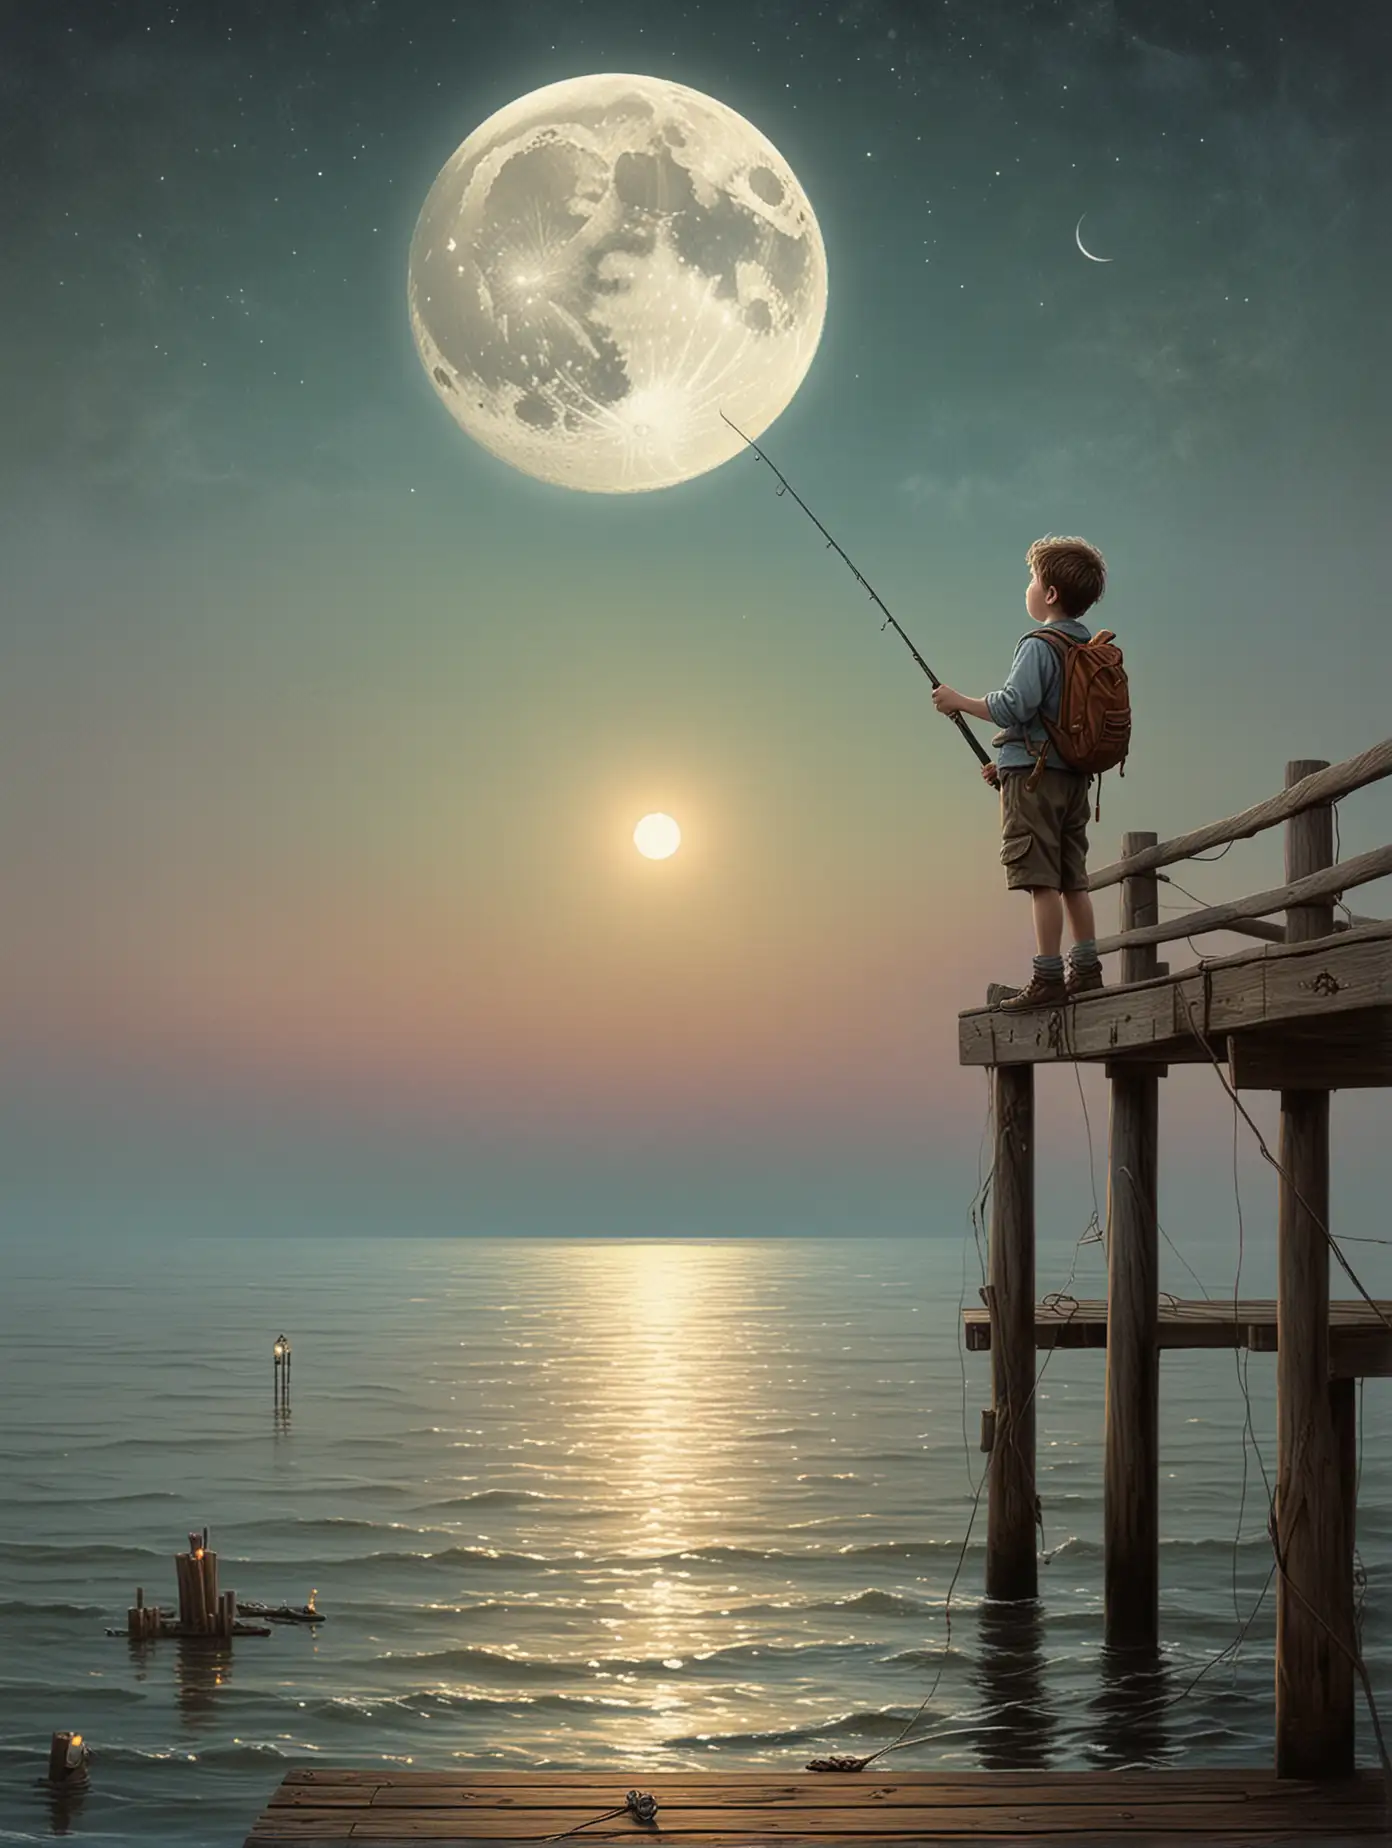 little boy standing on a pier, holding a fishing rod, looking up at the moon, pastel colors, vintage, kerem beyit, by Daniel Merriam, esao andrews, ornate, by Kerembeyit, inspired by Daniel Merriam, by Jan Kip, daniel merriam, highly detailed digital artwork, antique, vintage, dusty, and rugged illustration, poster composition